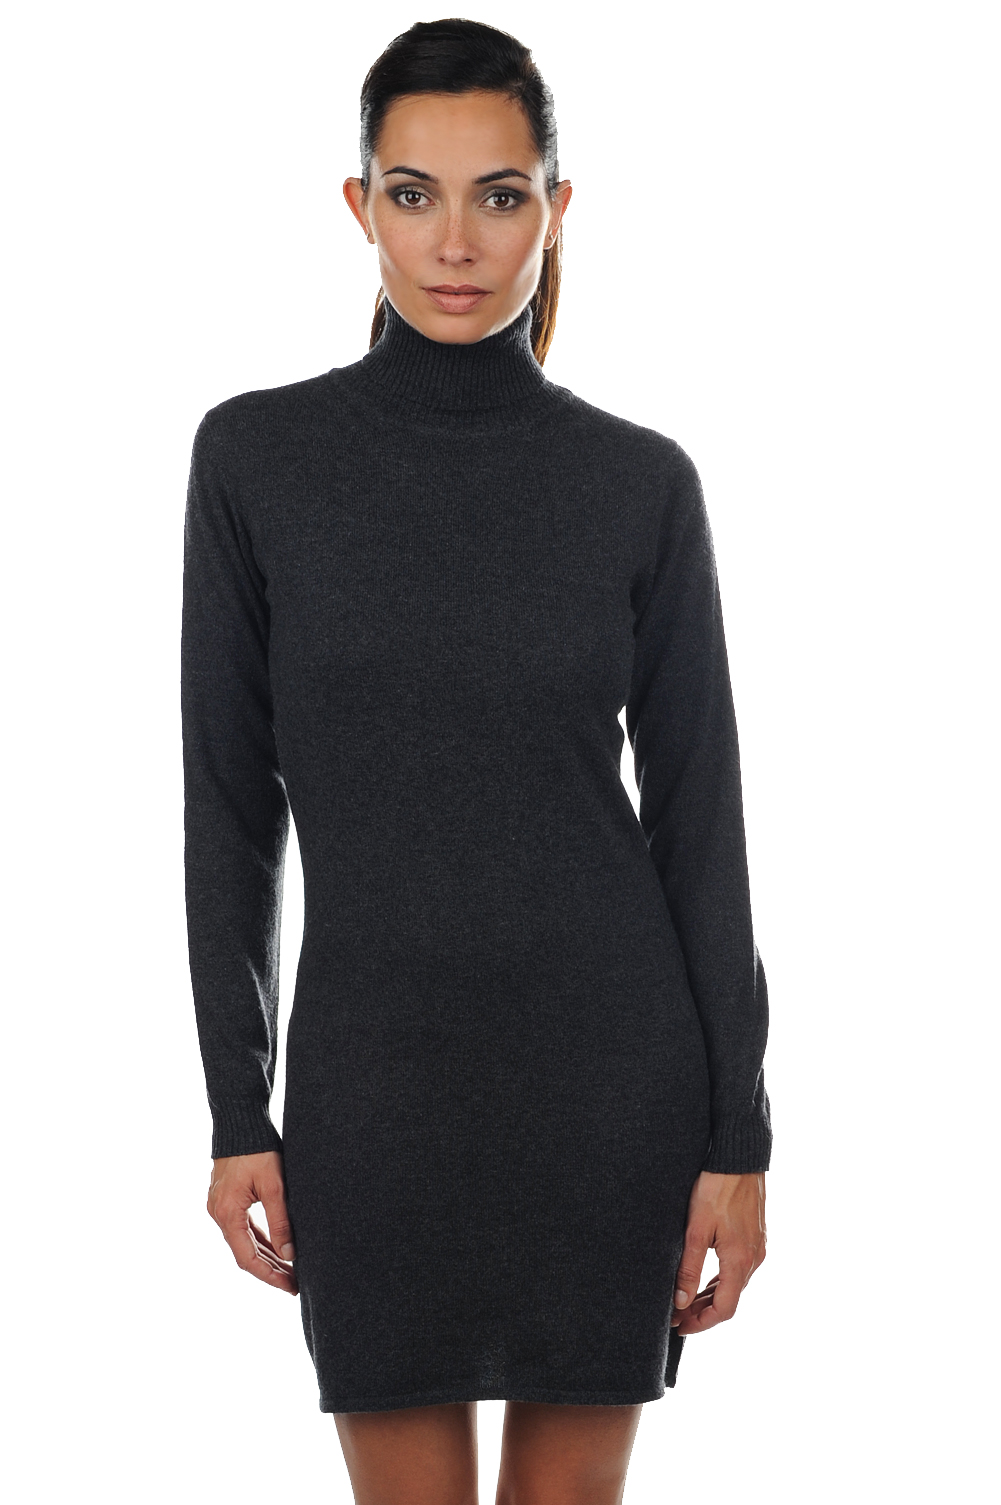 Cashmere ladies roll neck abie charcoal marl 2xl